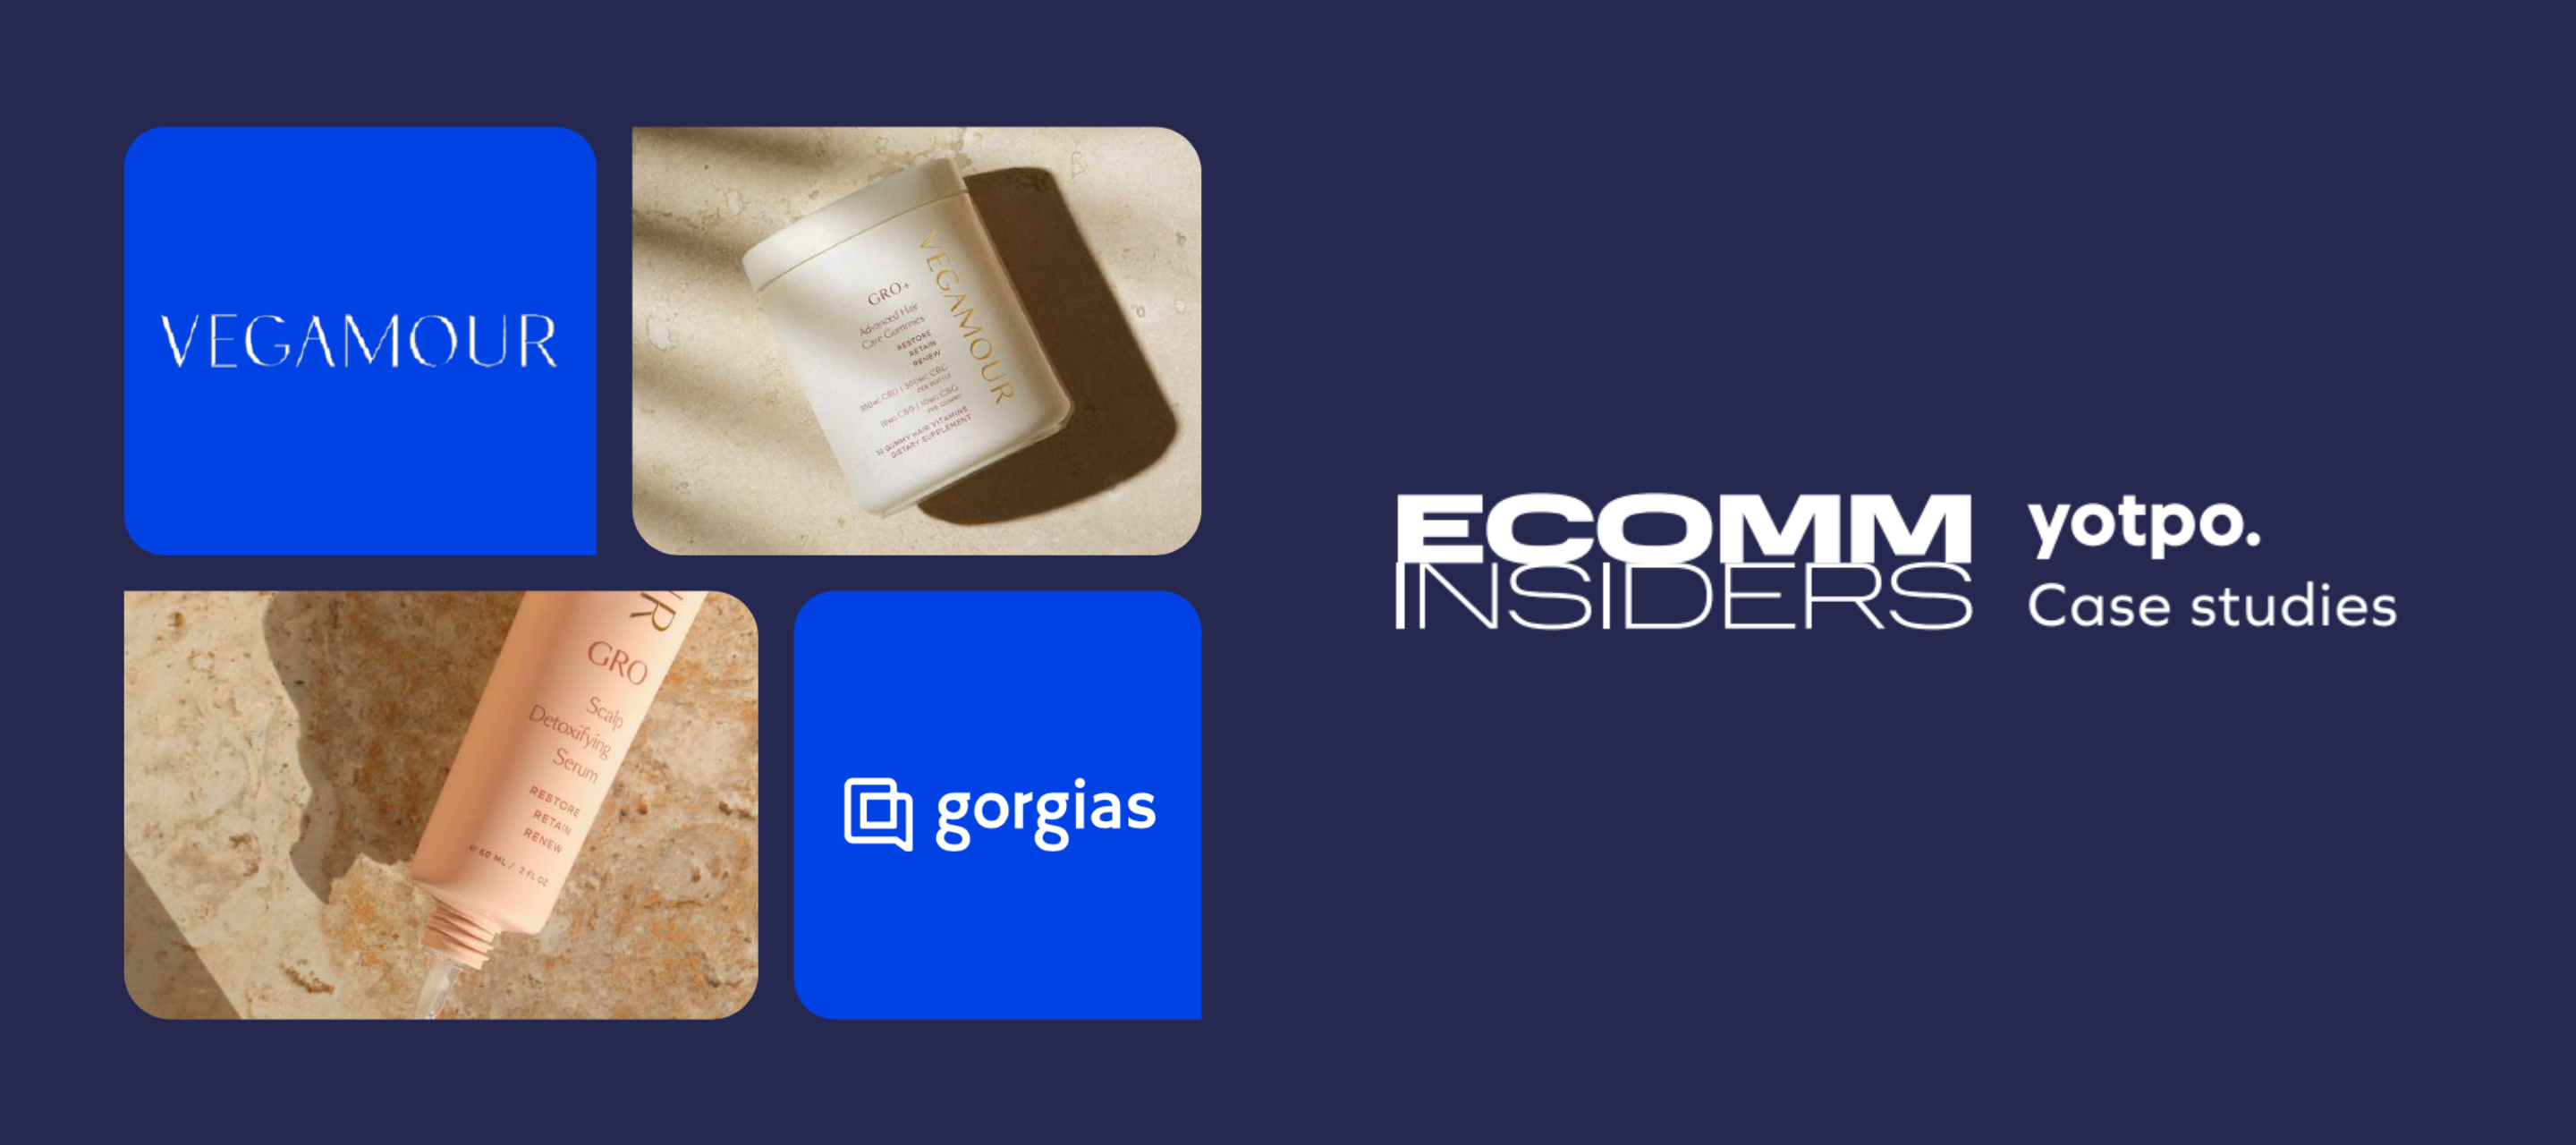 Vegamour streamlines customer service and loyalty with Gorgias and Yotpo